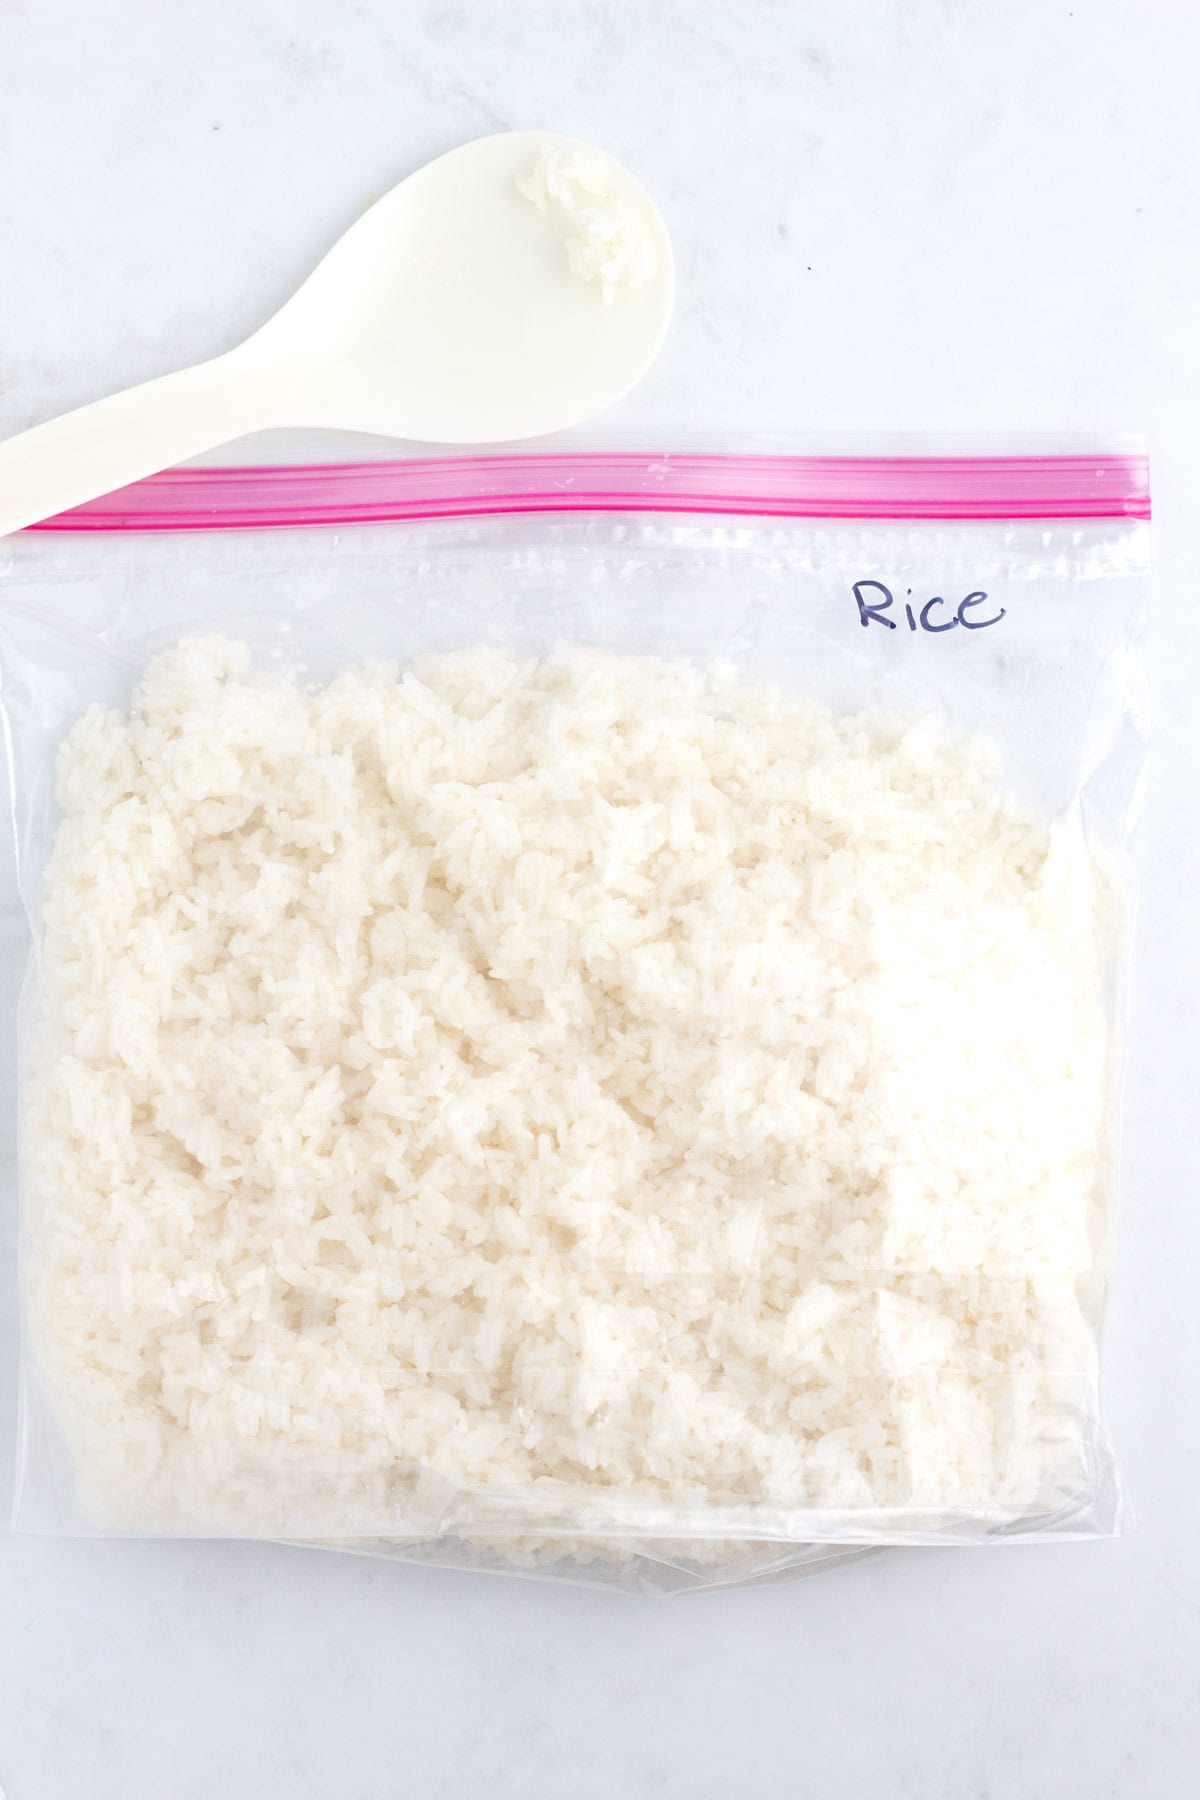 RIce in a freezer bag with a rice paddle laying on the counter.